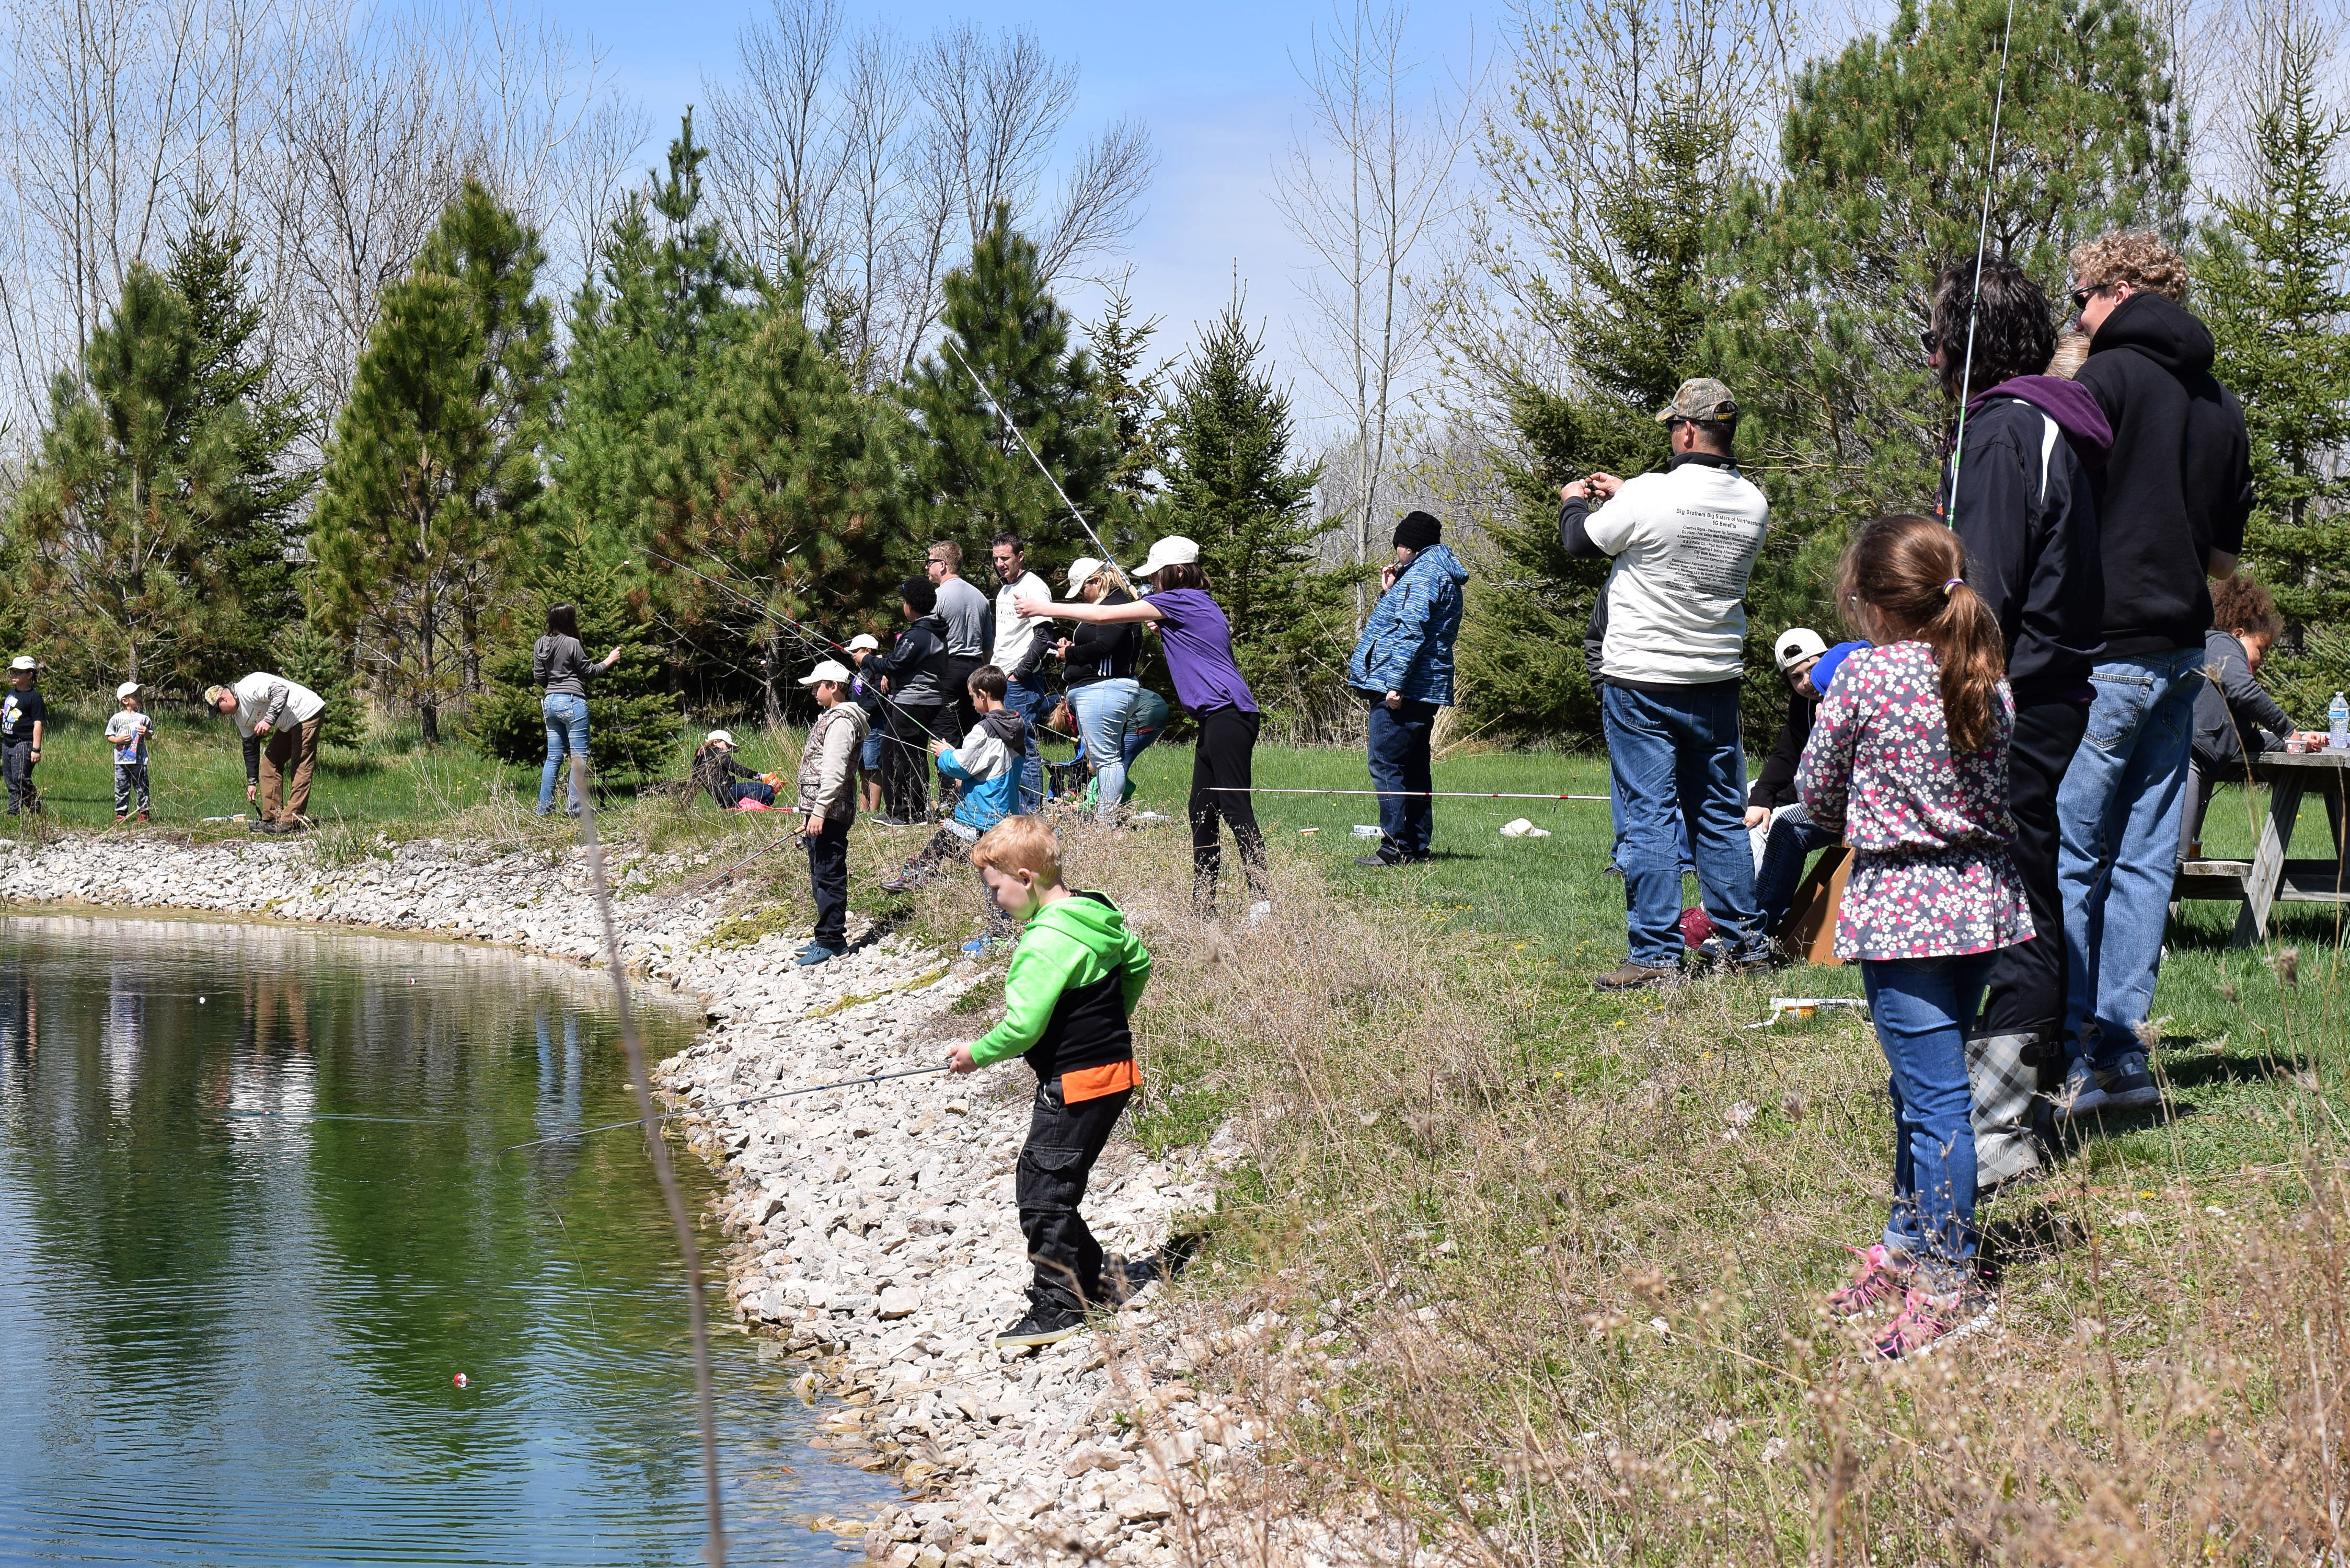 EVENT AIMS TO GET KIDS HOOKED ON FISHING  Big Brothers Big Sisters of  Northeast Wisconsin